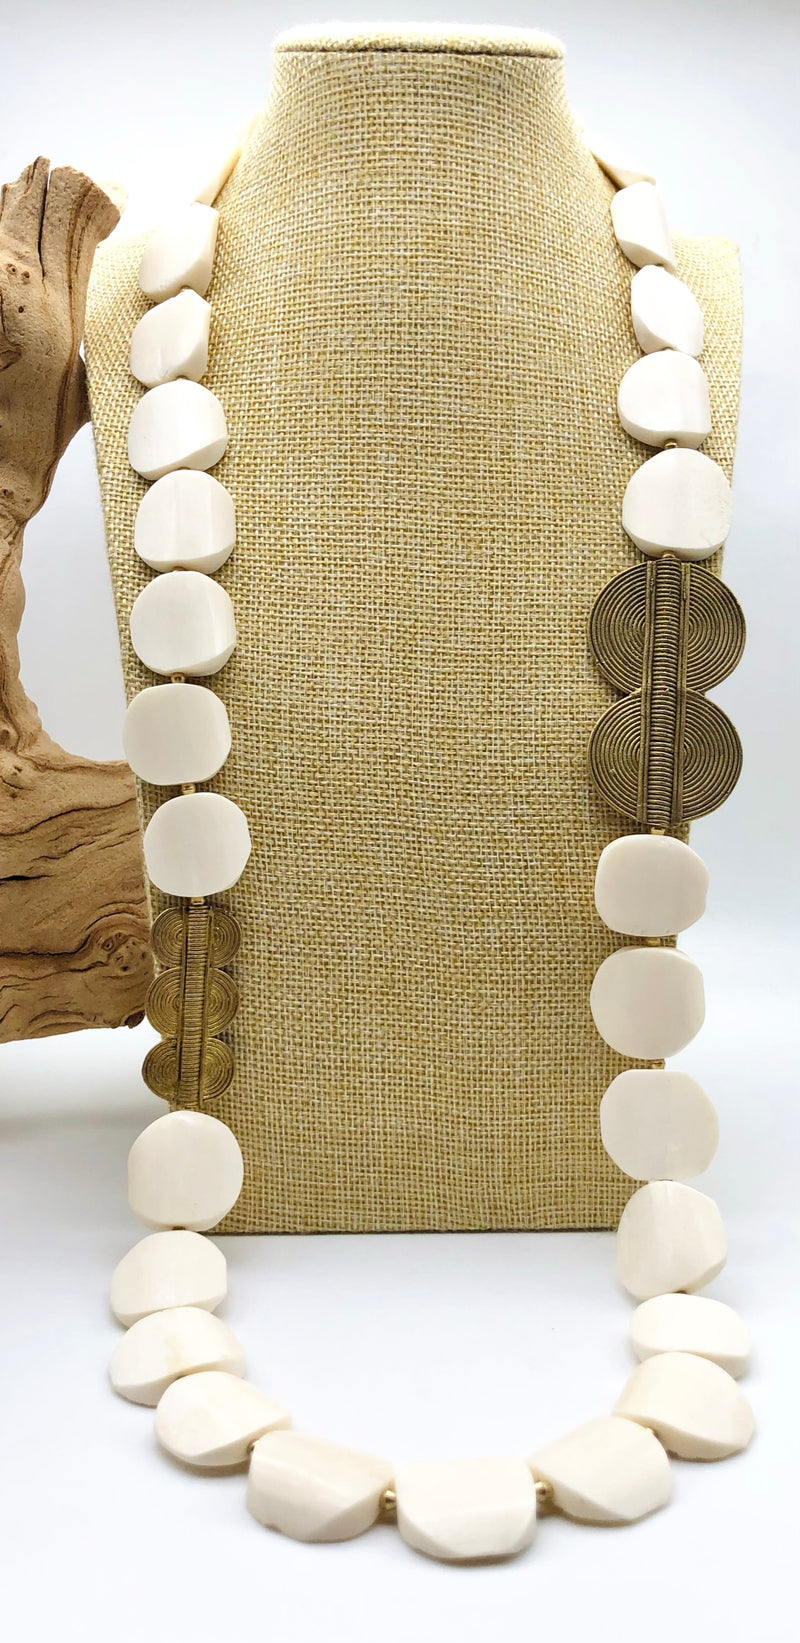 A Vintage Native American Trade Beads and Bone Bead Necklace | eBay